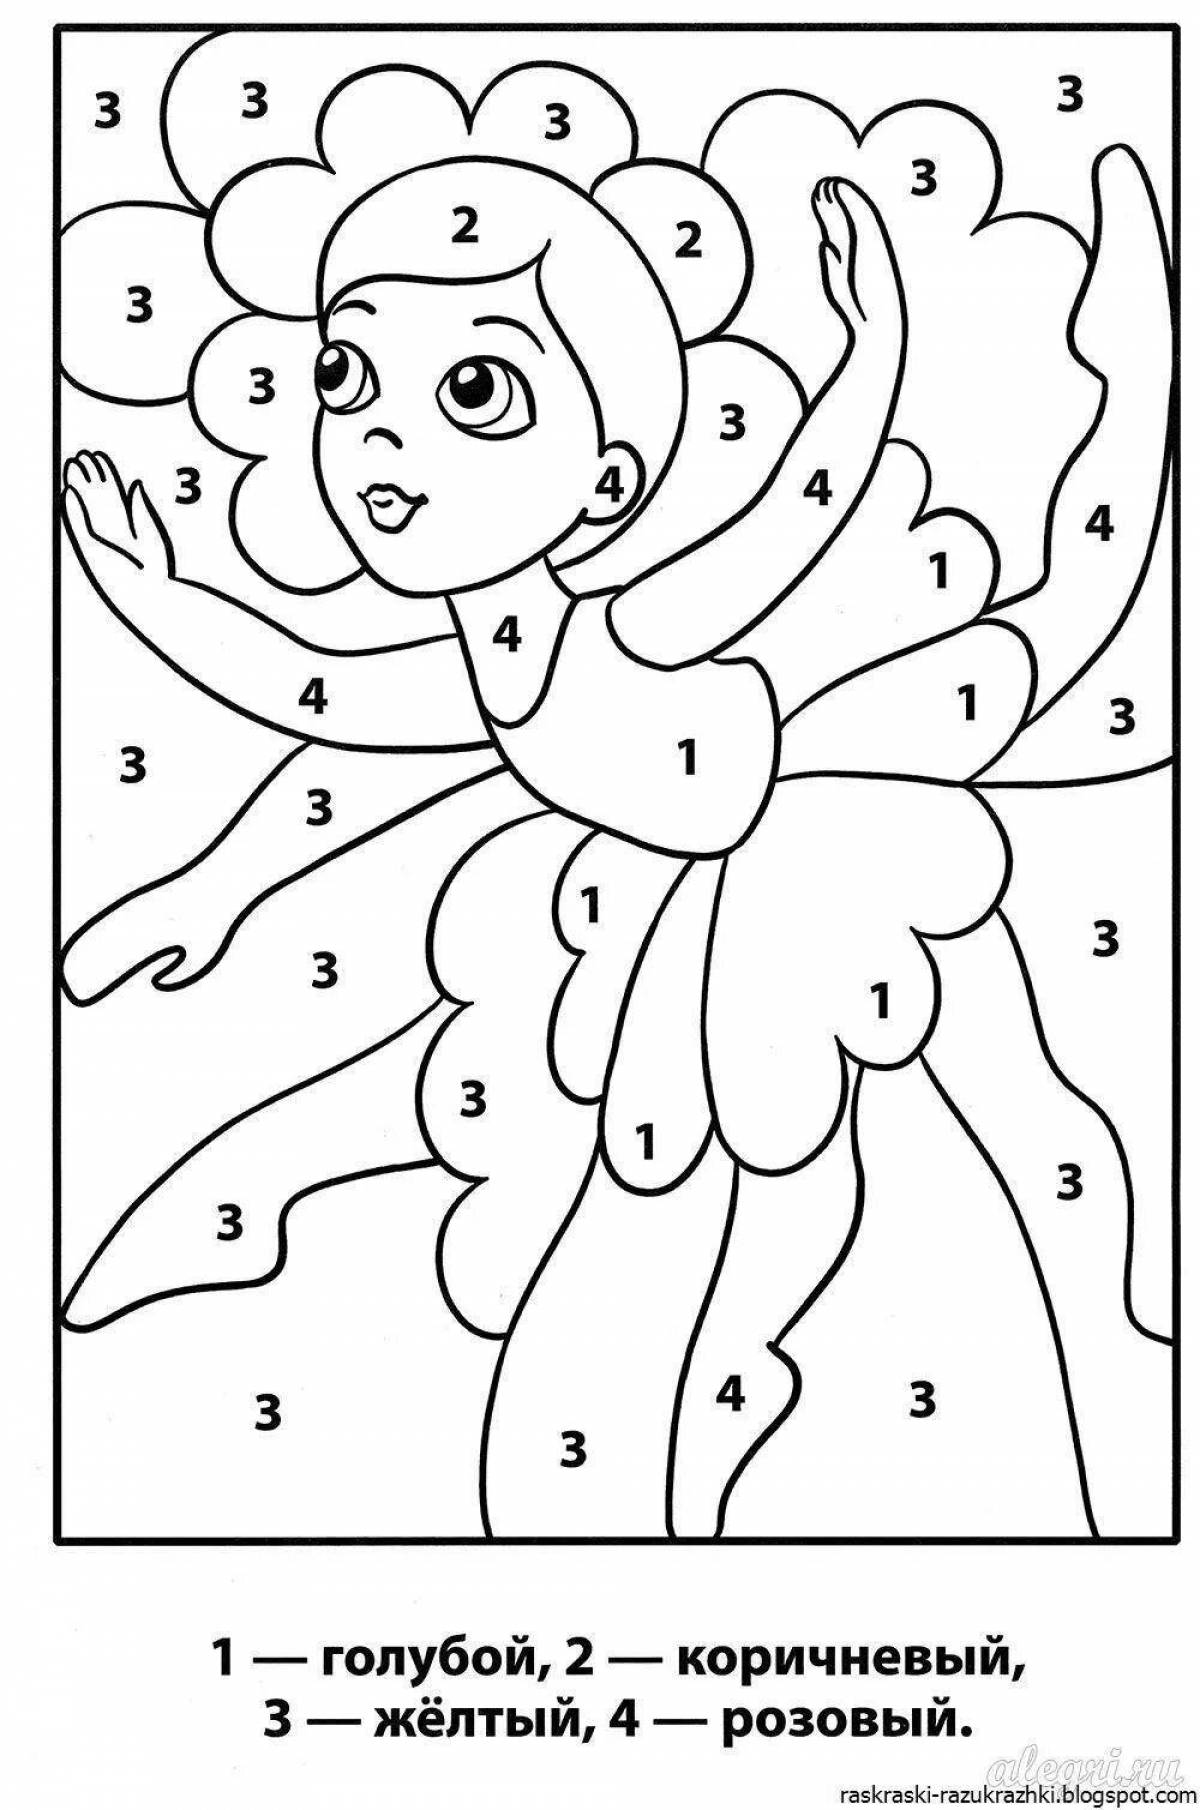 Updating the 6 Years by Numbers coloring page